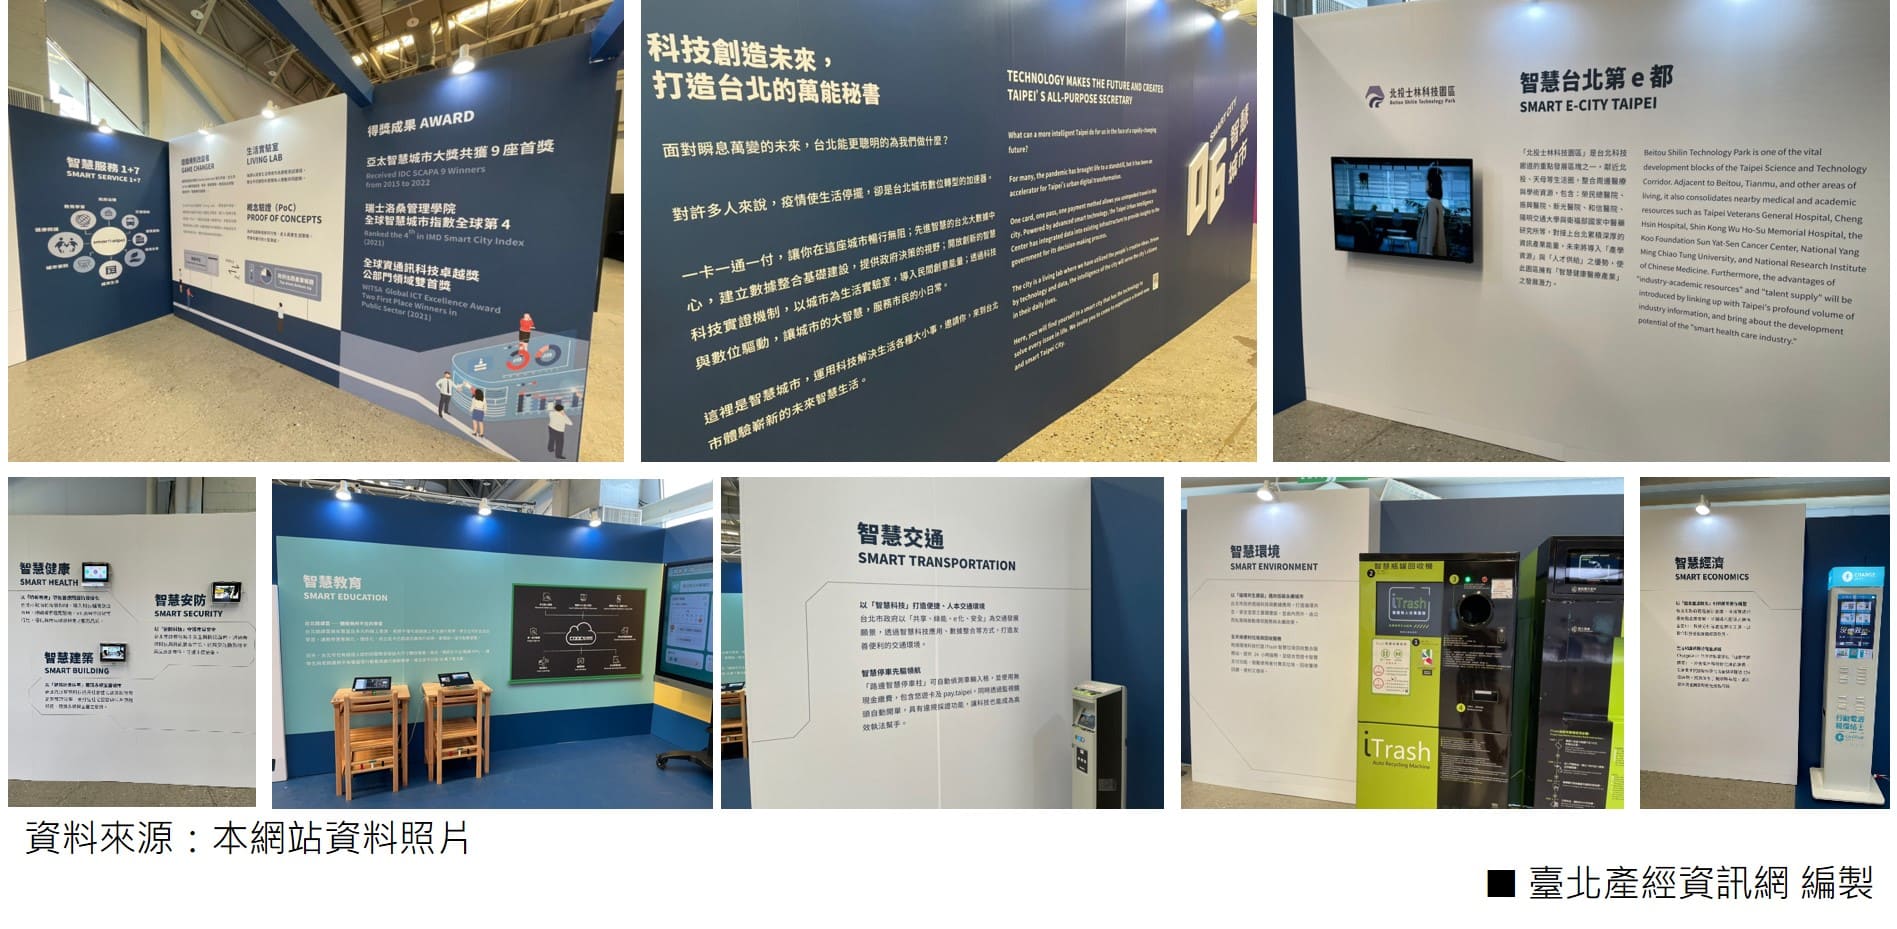 Display of achievements in the “Smart City” exhibition zone